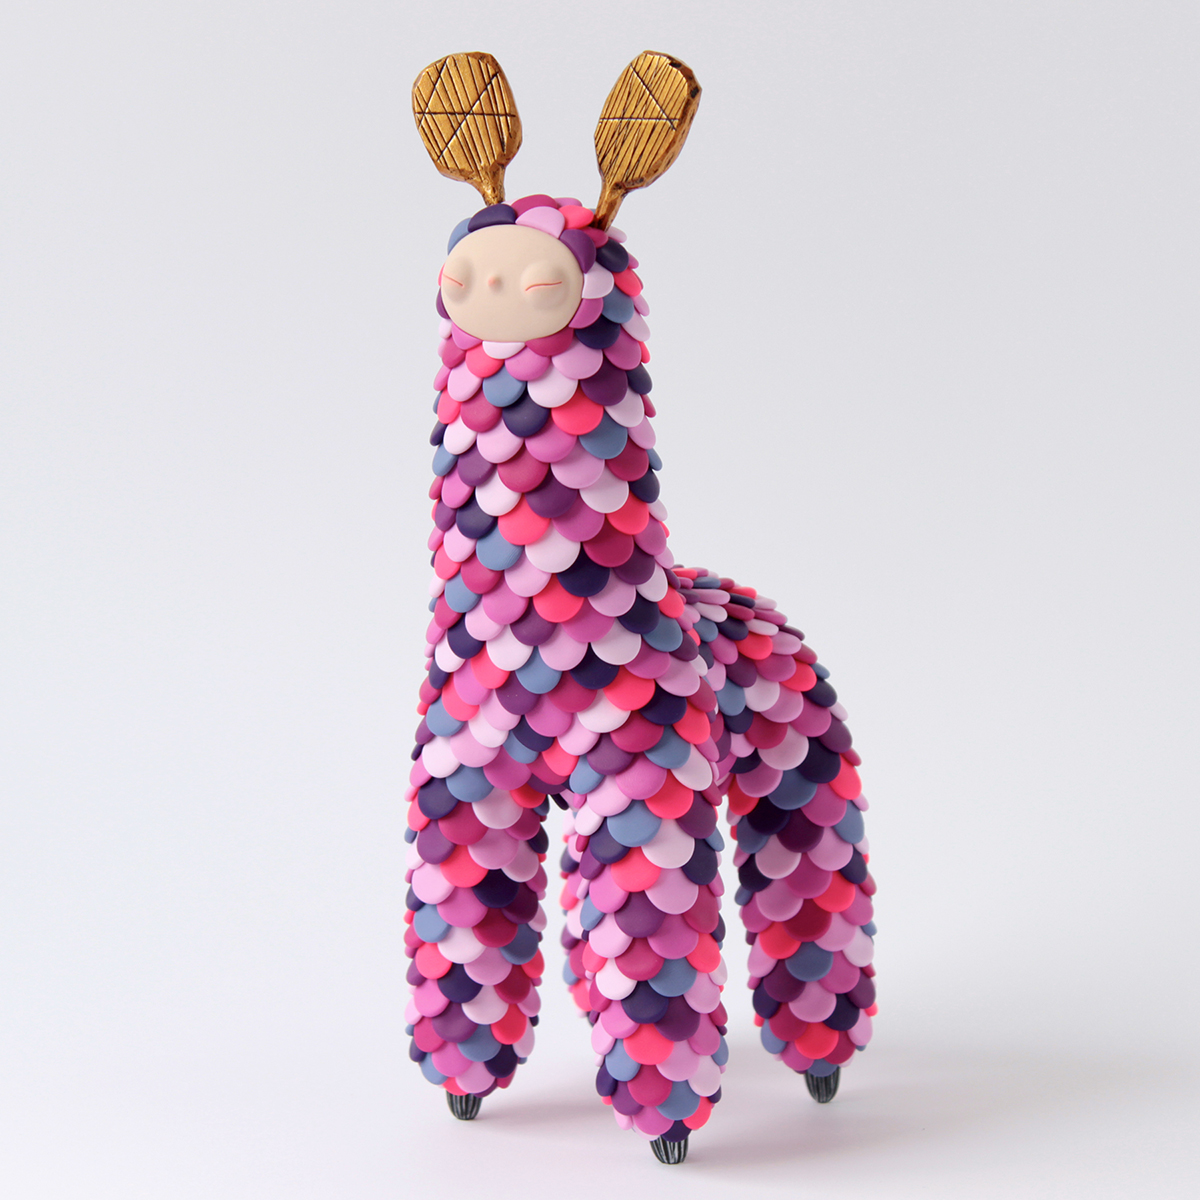 Polymer clay sculpture of an imaginary lama with colorful scales and antlers